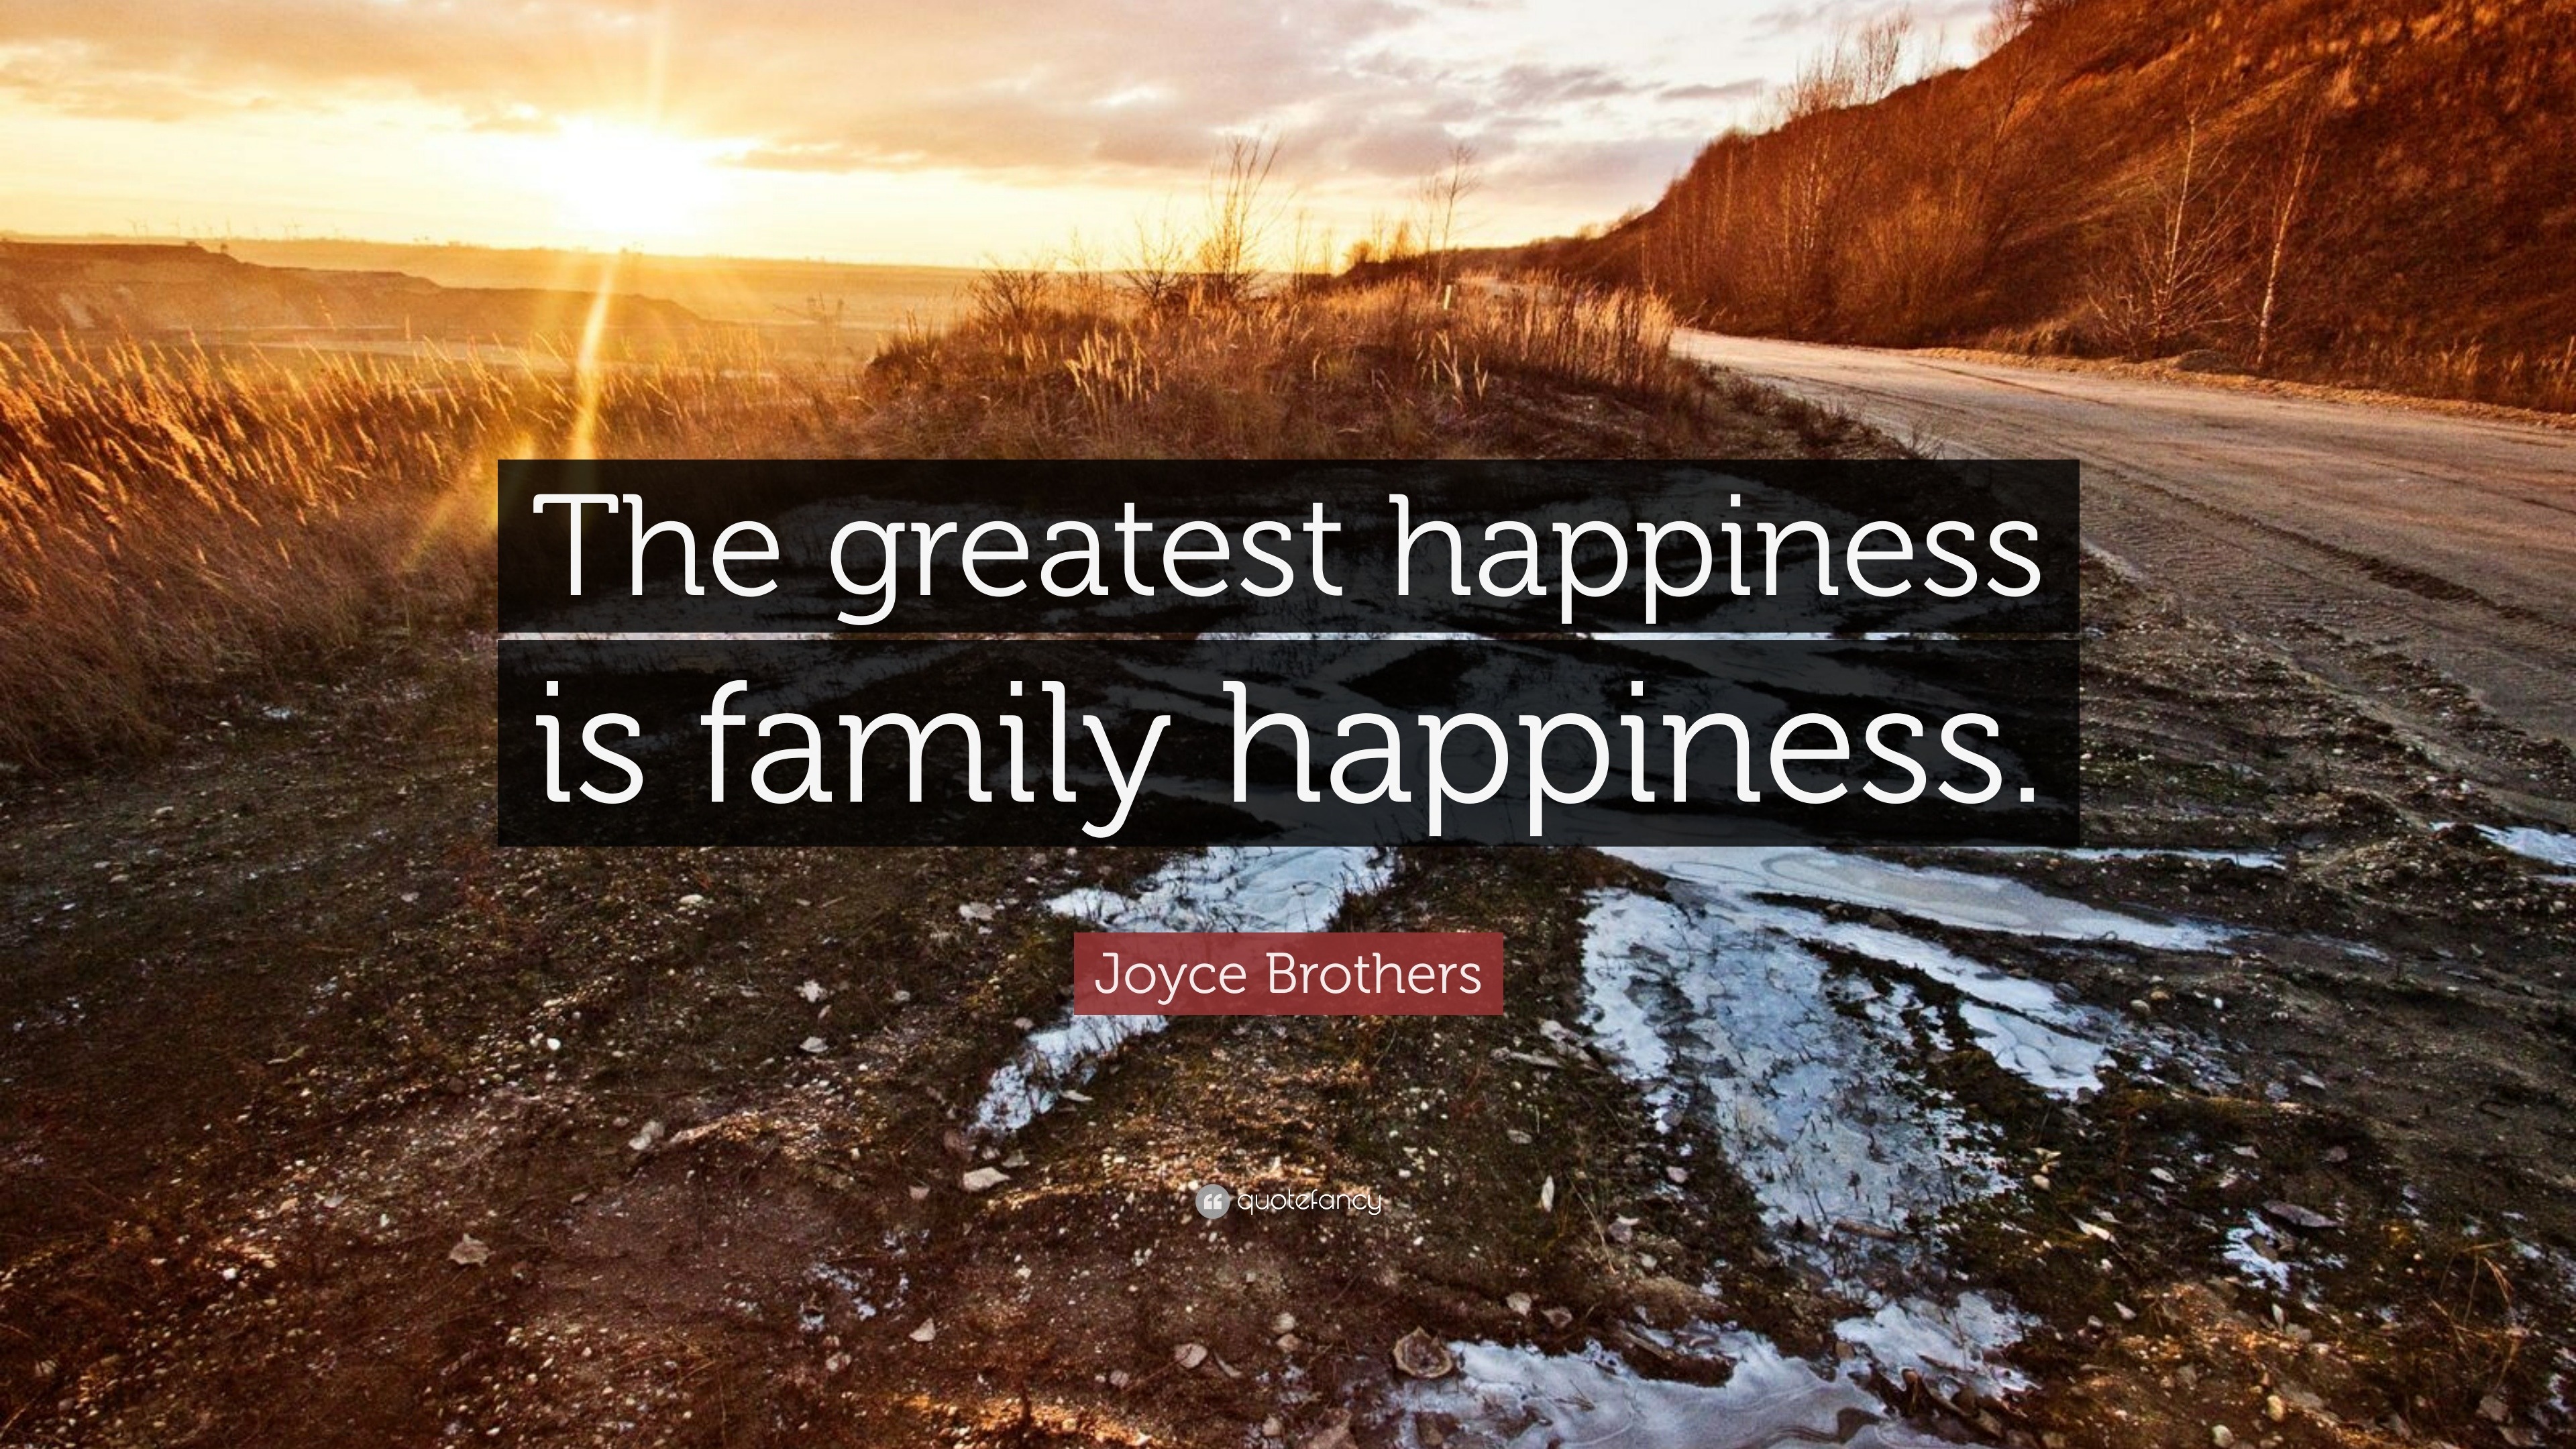 Joyce Brothers Quote: “The greatest happiness is family happiness.”